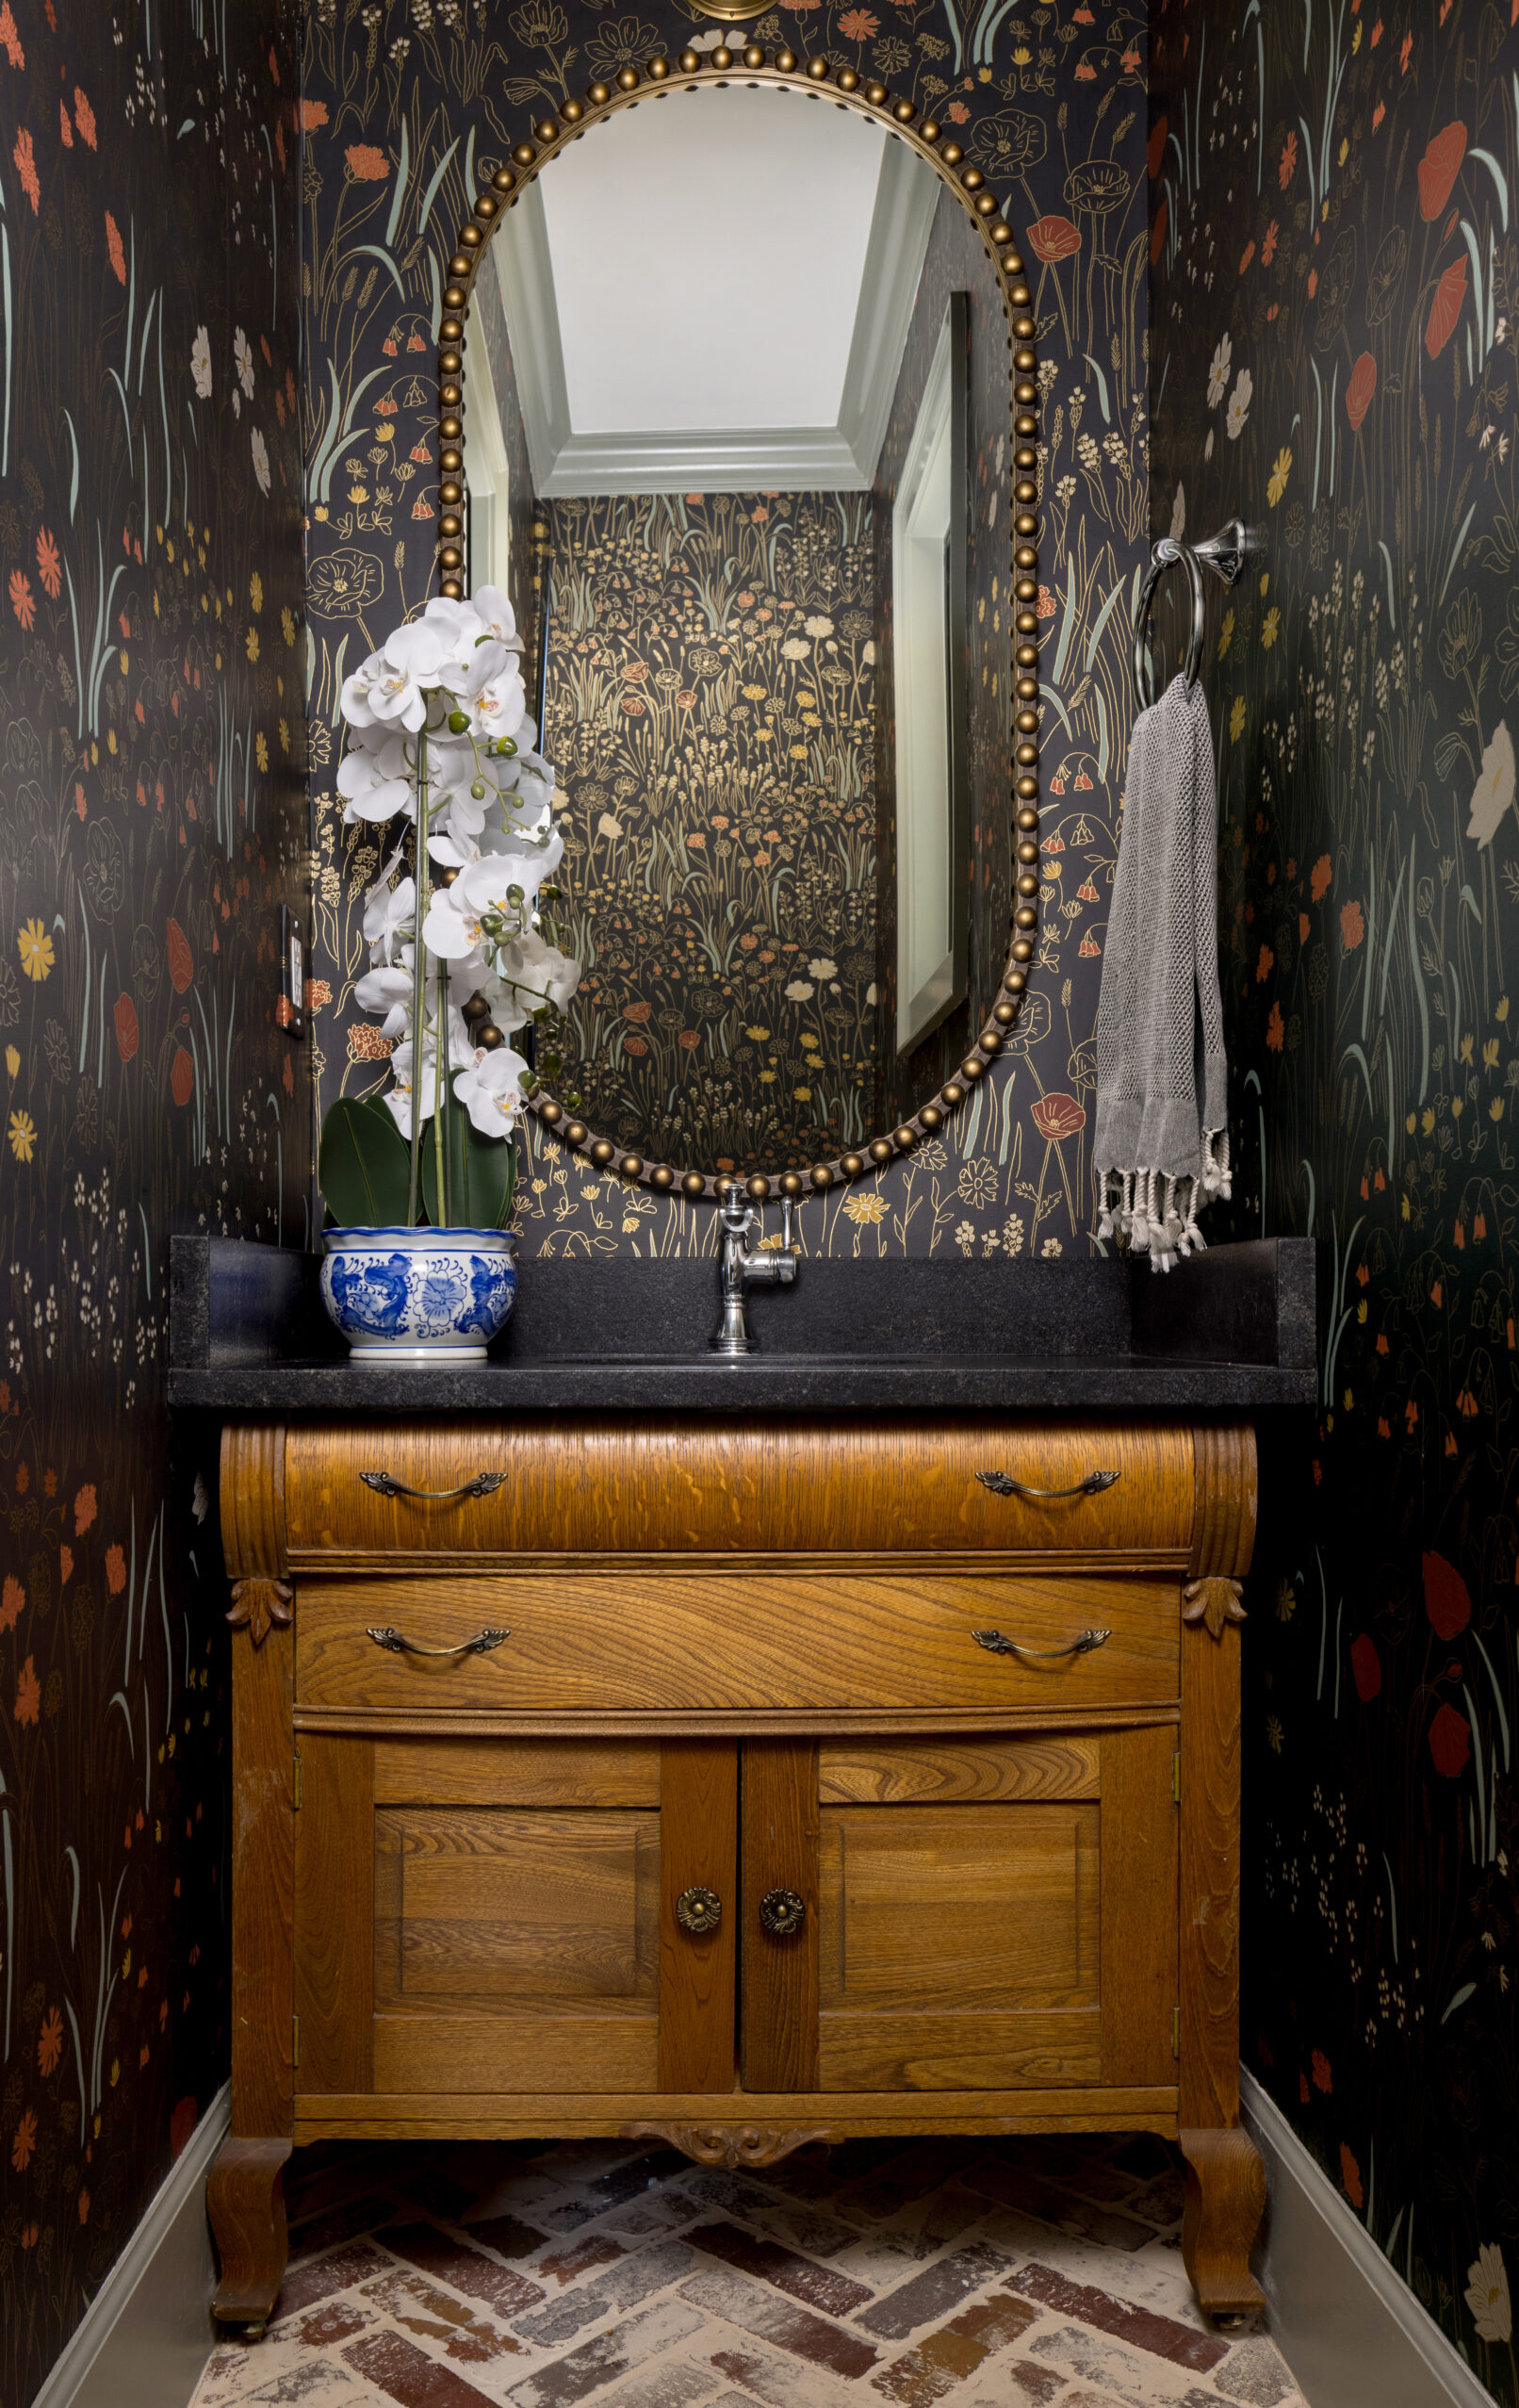 Interior photo of a bathroom with black decorative wallpaper, a gold mirror and wood chest for a cabinet.